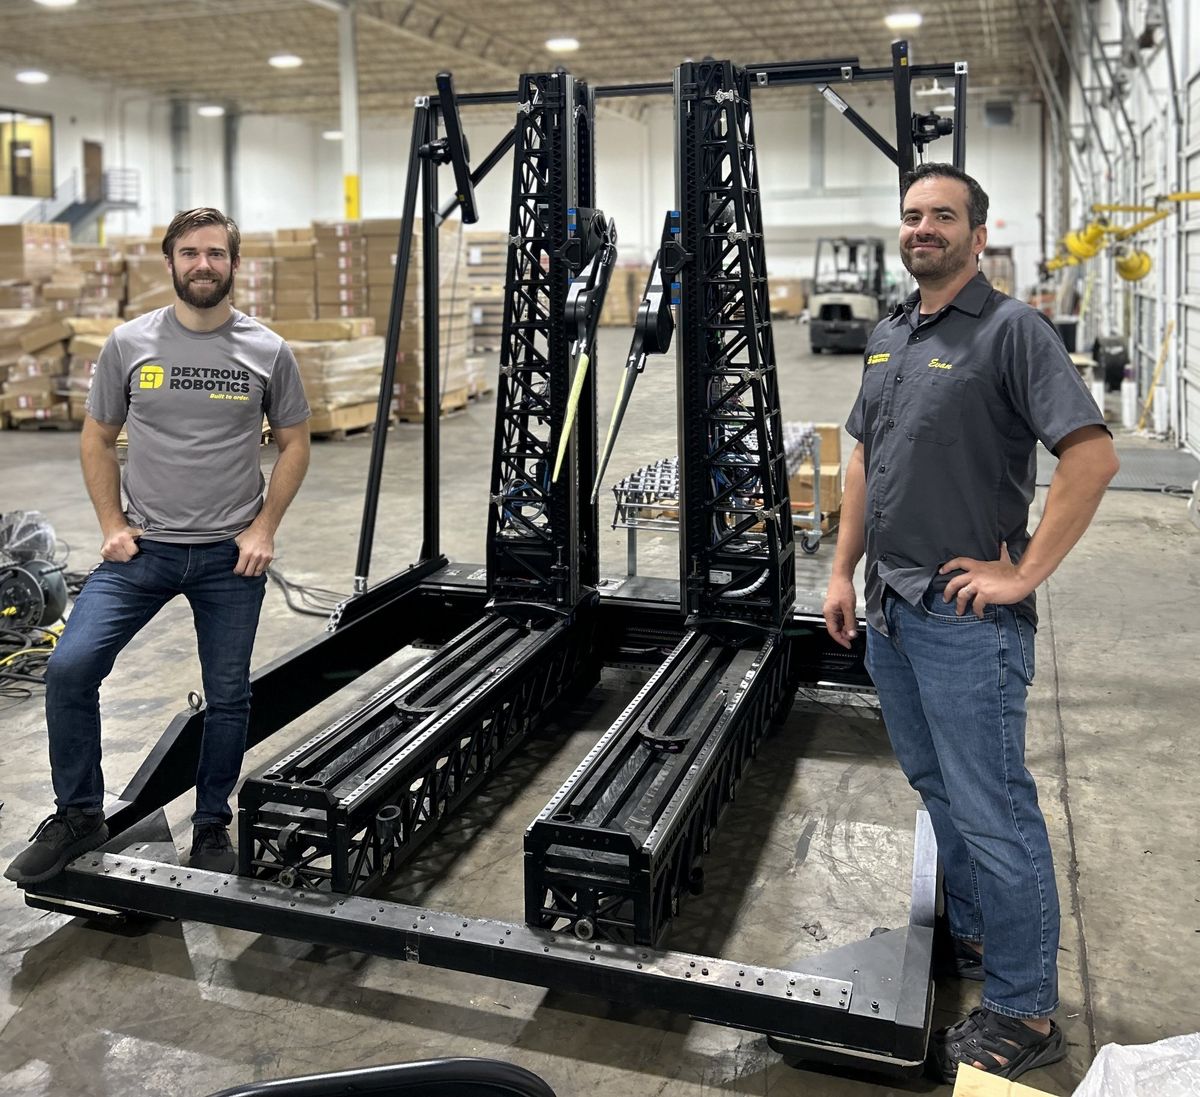 Two men stand next to a black mechanical robotic frame taller than they are, which big chopstick grippers connected to movable towers.